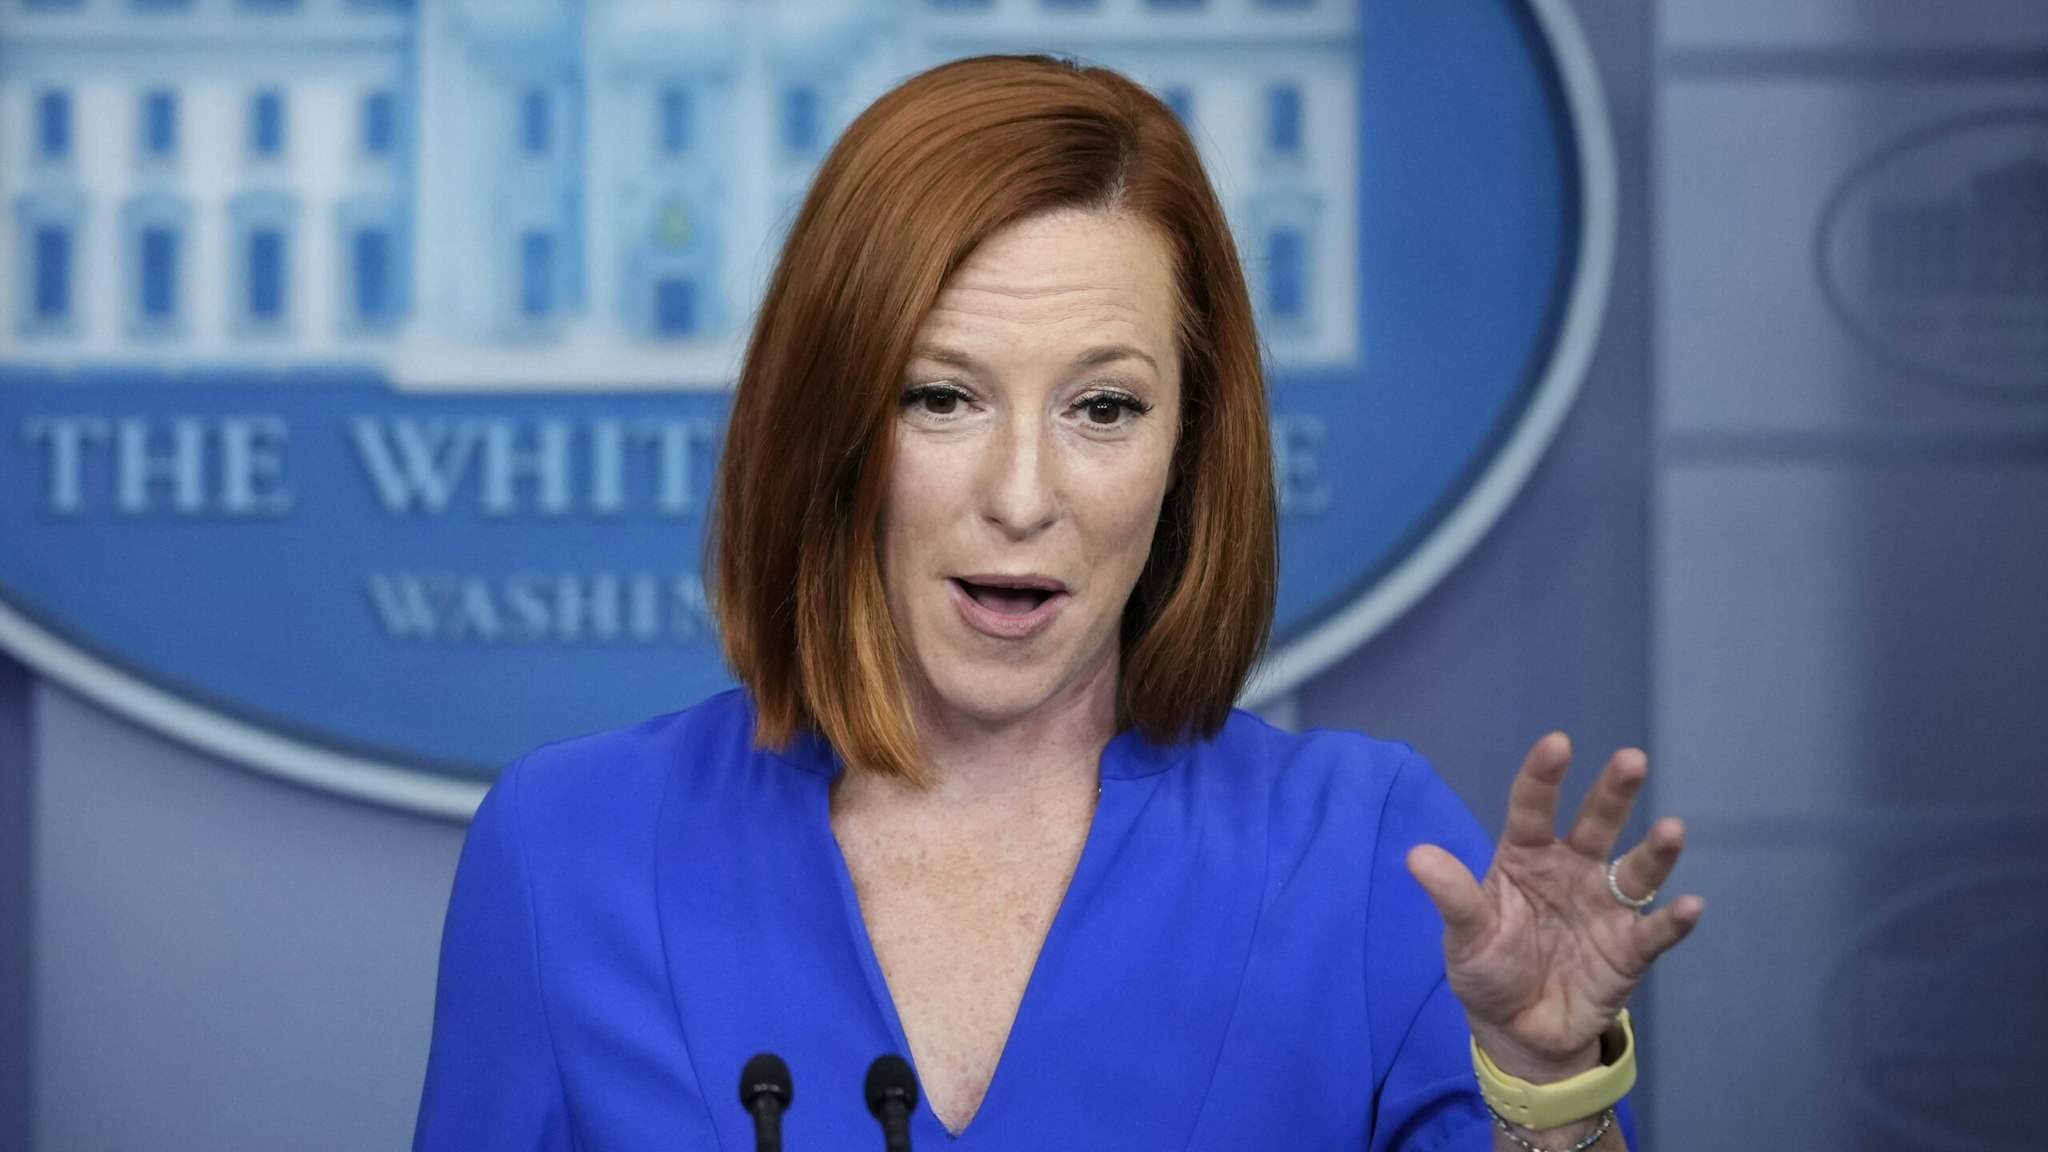 WASHINGTON, DC - OCTOBER 14: White House Press Secretary Jen Psaki speaks during the daily press briefing at the White House October 14, 2021 in Washington, DC. Psaki announced that President Joe Biden will deliver the keynote address at the 40th Annual National Peace Officers' Memorial Service on Saturday at the U.S. Capitol.